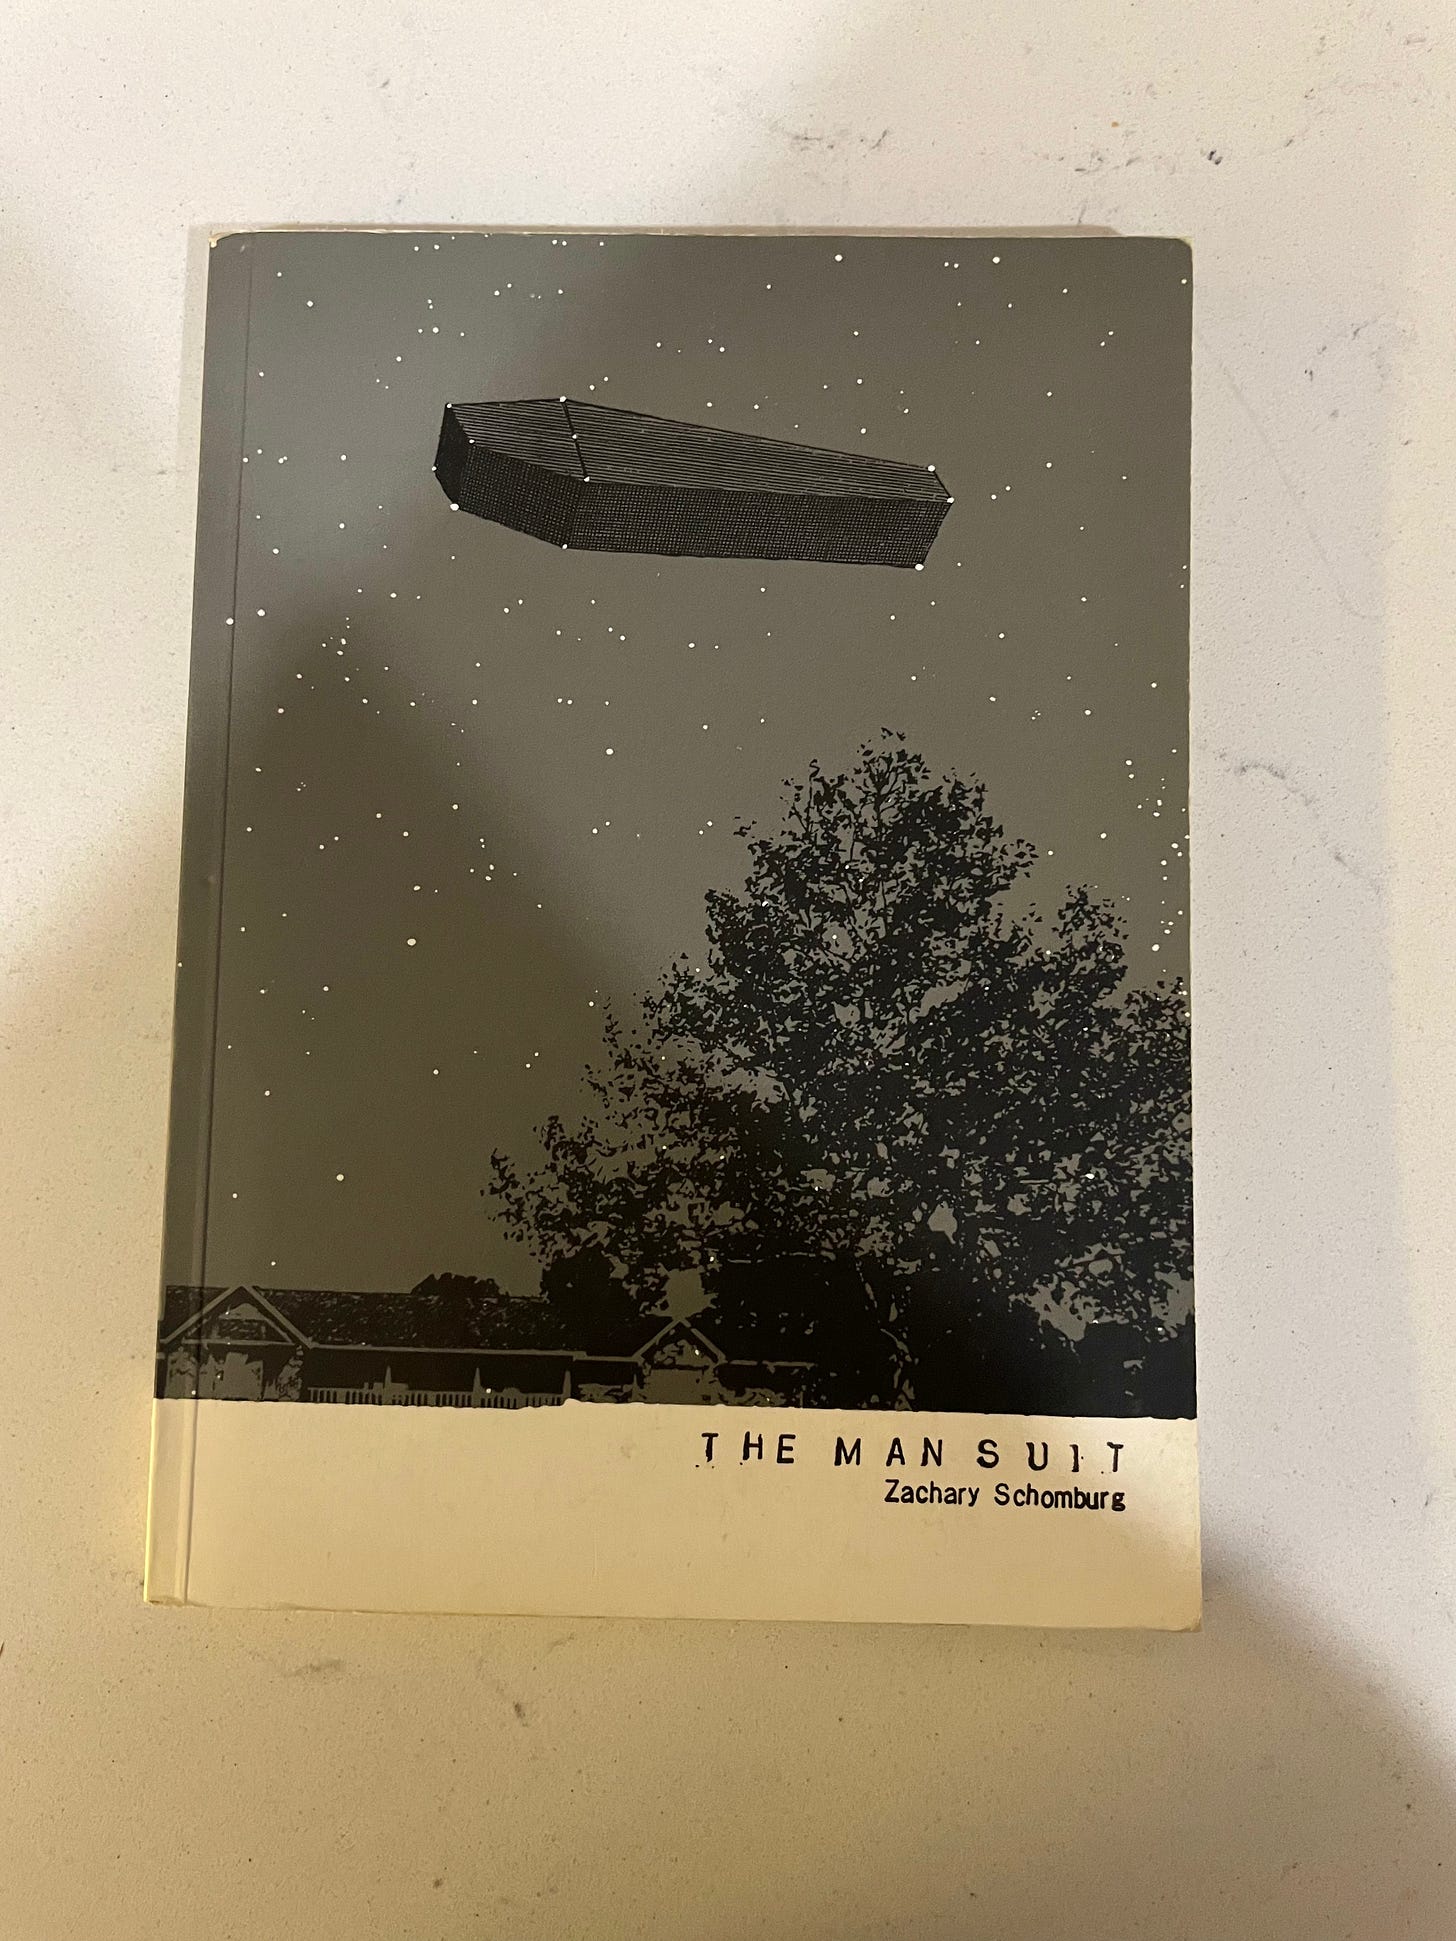 'The Man Suit' by Zachary Schomburg. Cover is a gray sky with white stars and a black tree and a black ranch-style house with a gray-on-darker-gray coffin floating in the sky